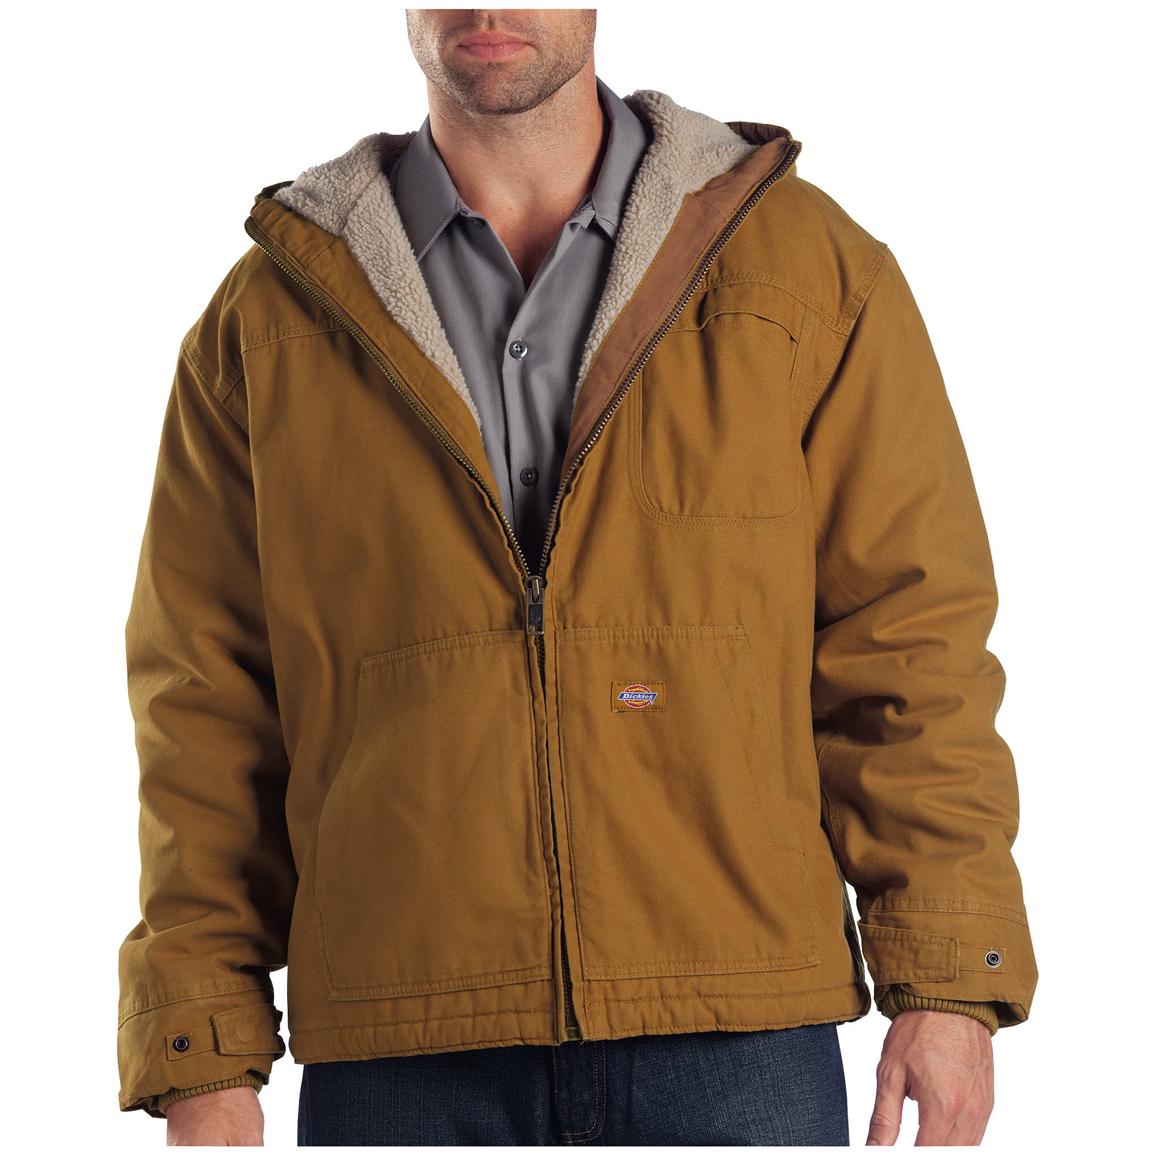 Dickies Sanded Duck Sherpa-Lined Hooded Work Jacket - 421293, Insulated